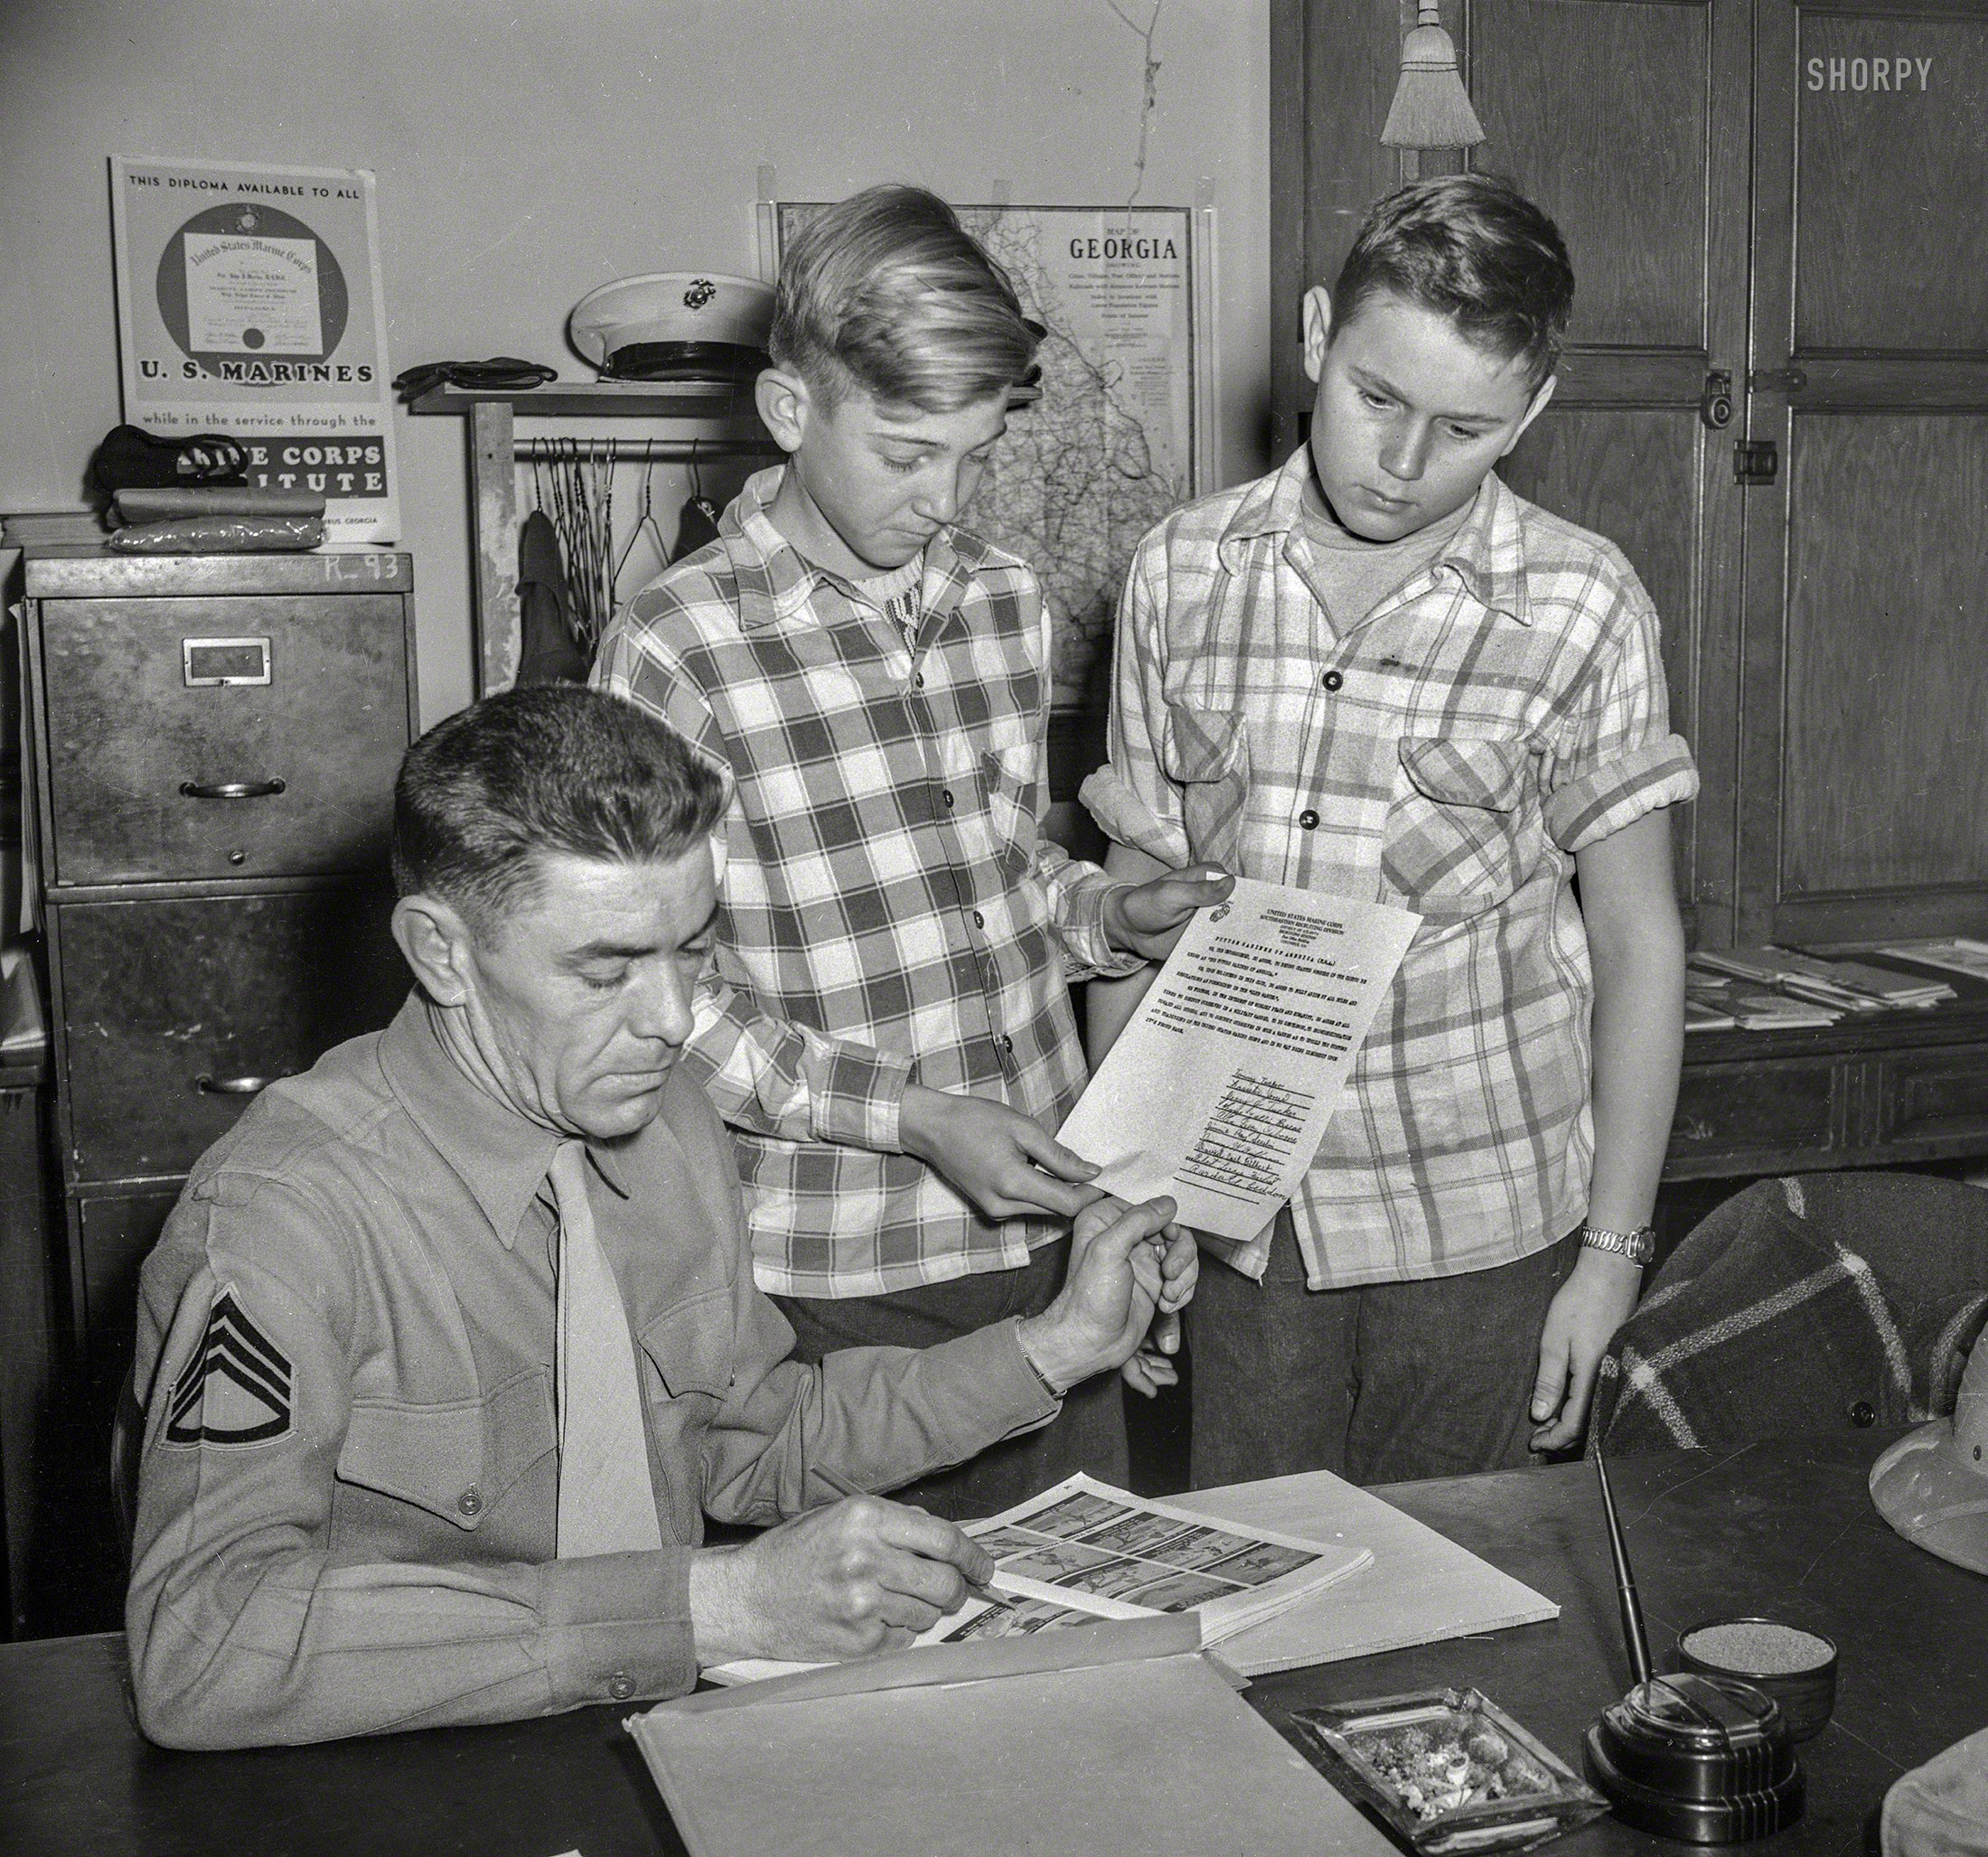 Columbus, Georgia, 1951. "Future Marines of America -- Juniors." Signatories of the FMA pledge ("We further, in the interest of worldly peace and humanity, do agree at all times to conduct ourselves in a military manner") include Tommy Tucker, Jerry Tucker, Lasseter Jones and Allen Leroy Osborne. 4x5 acetate negative from the News Photo Archive. View full size.